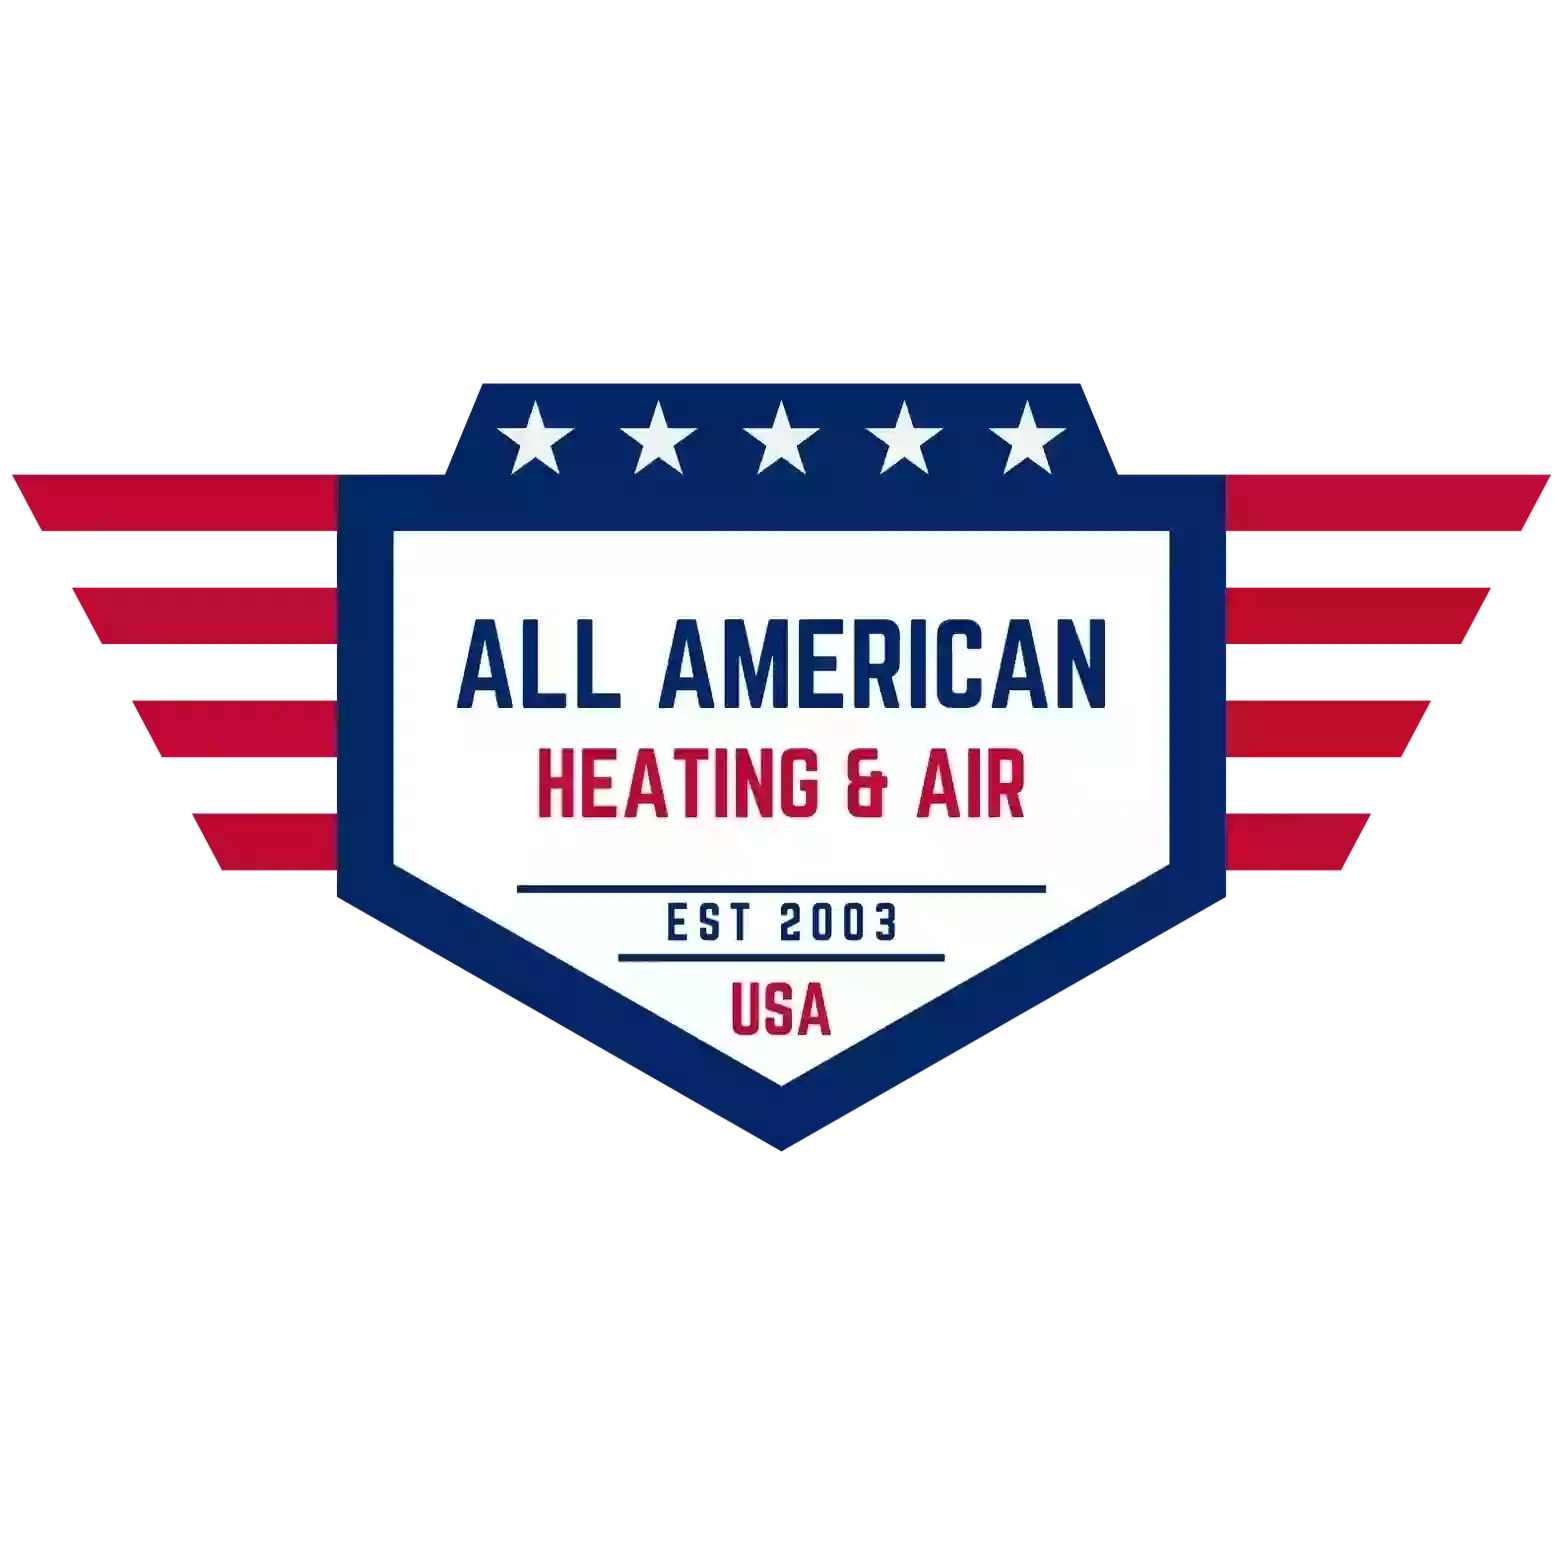 All American Heating and Air Conditioning Services Inc.